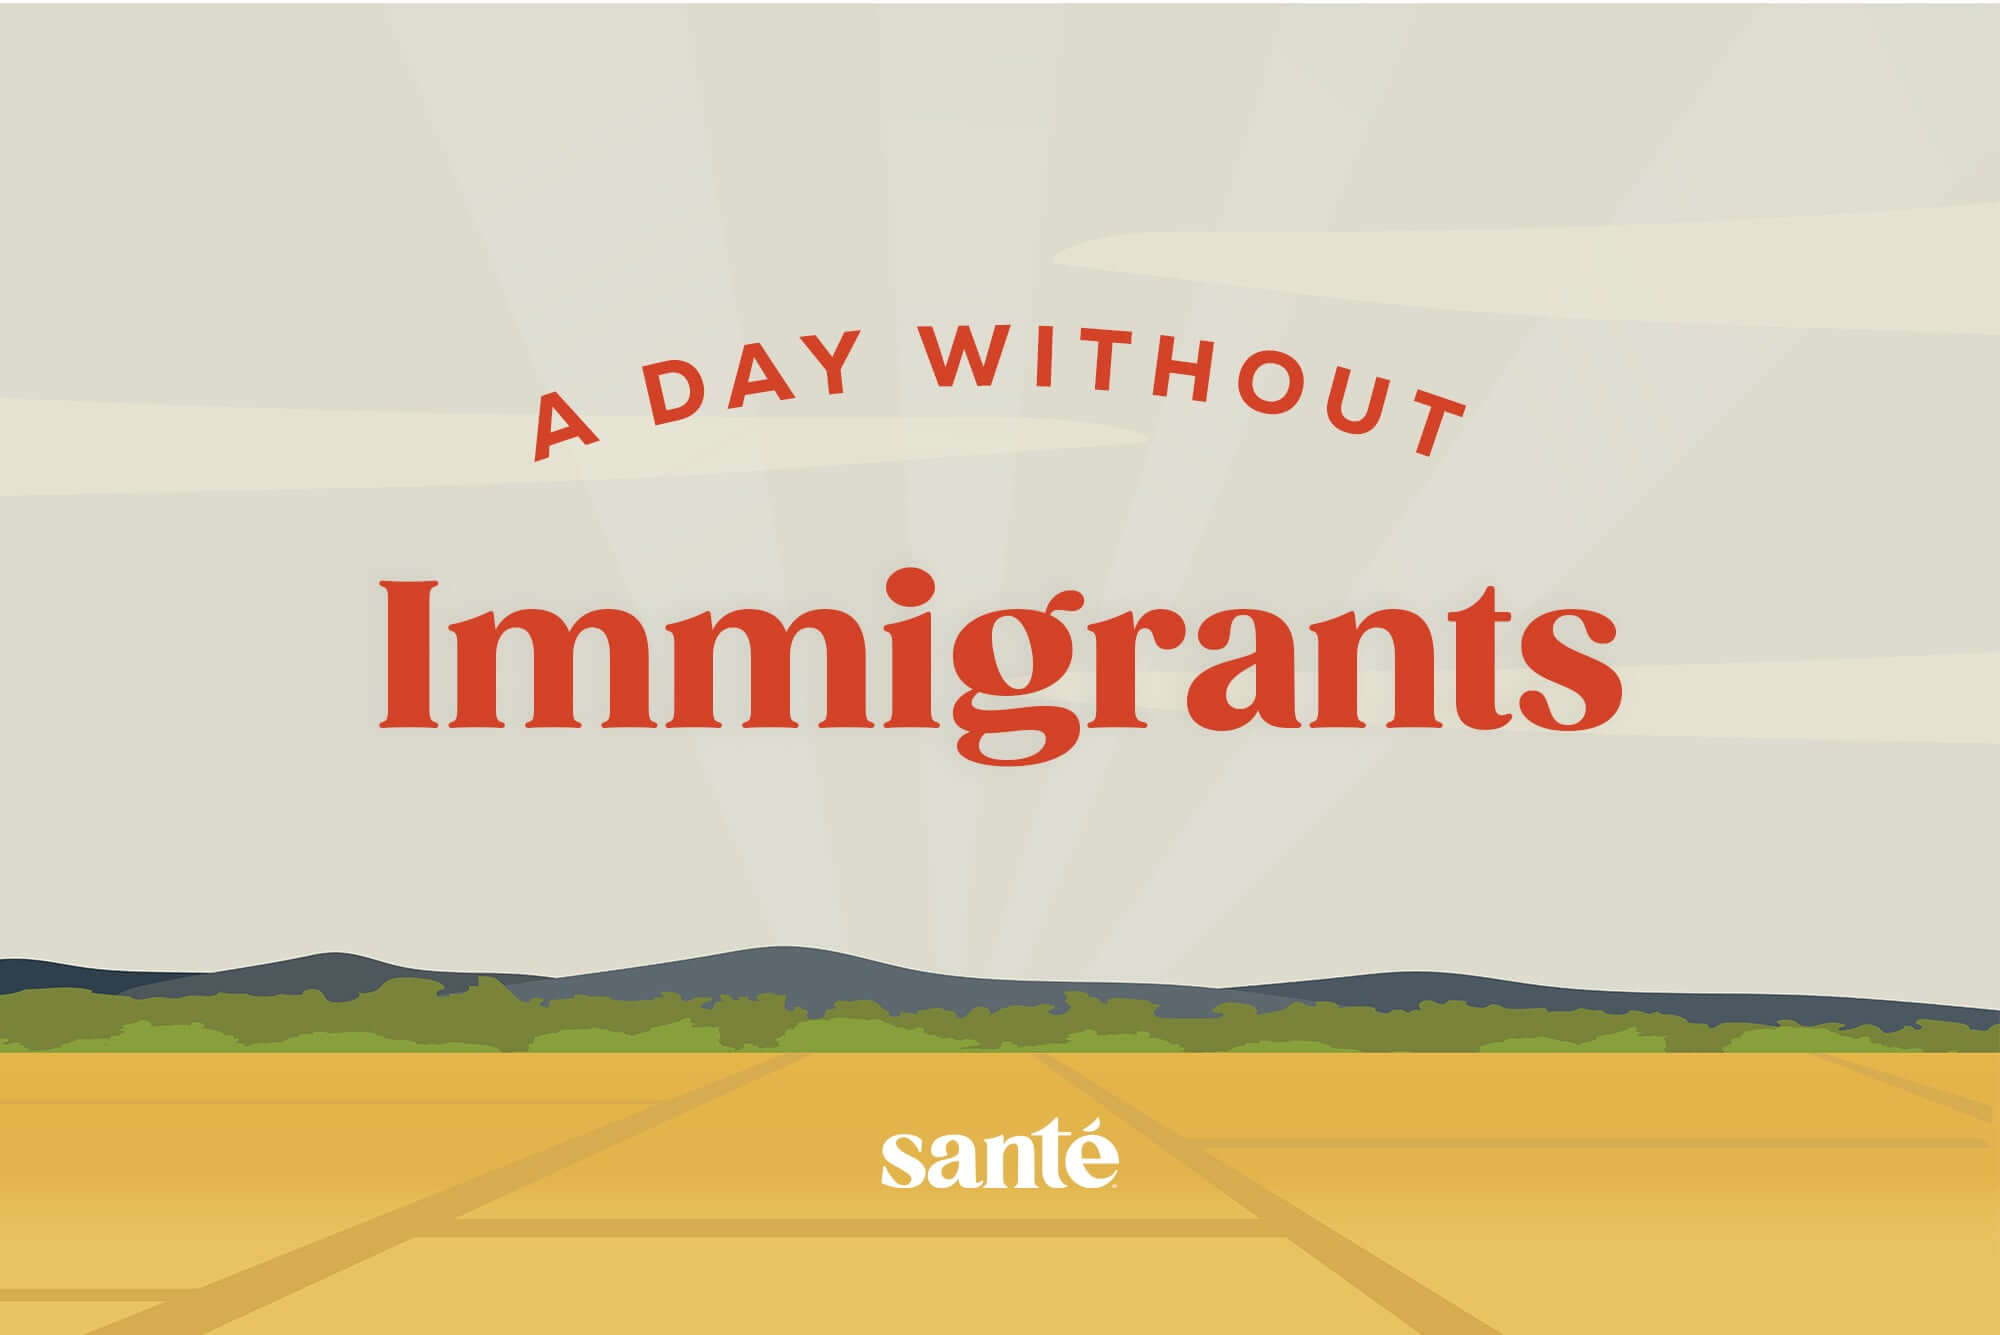 A Day Without Immigrants